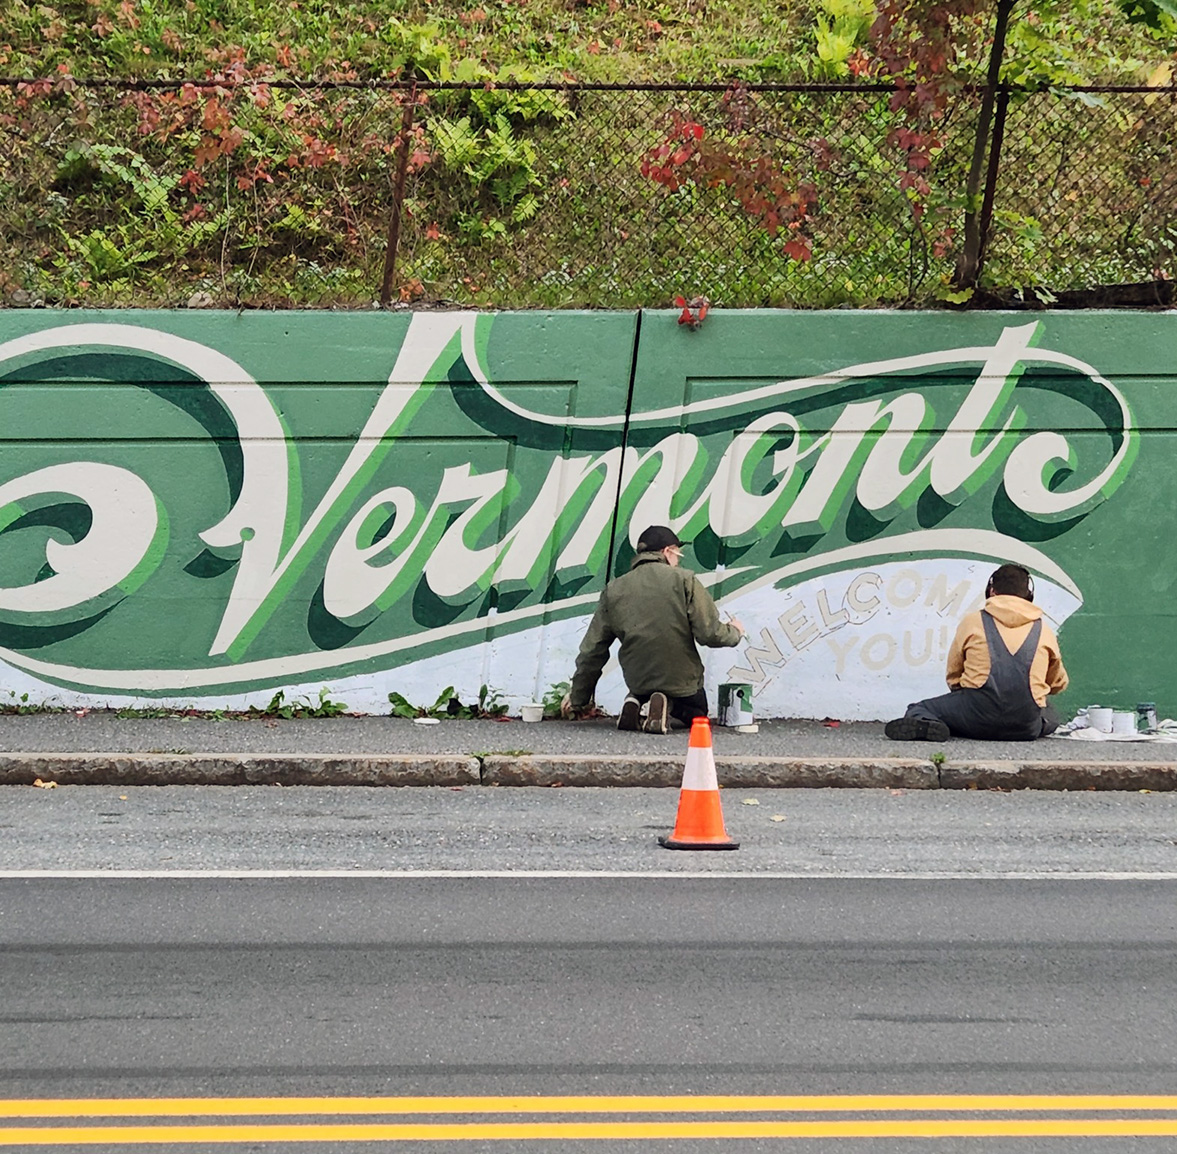 Two people work on a mural project on the side of a paved road.